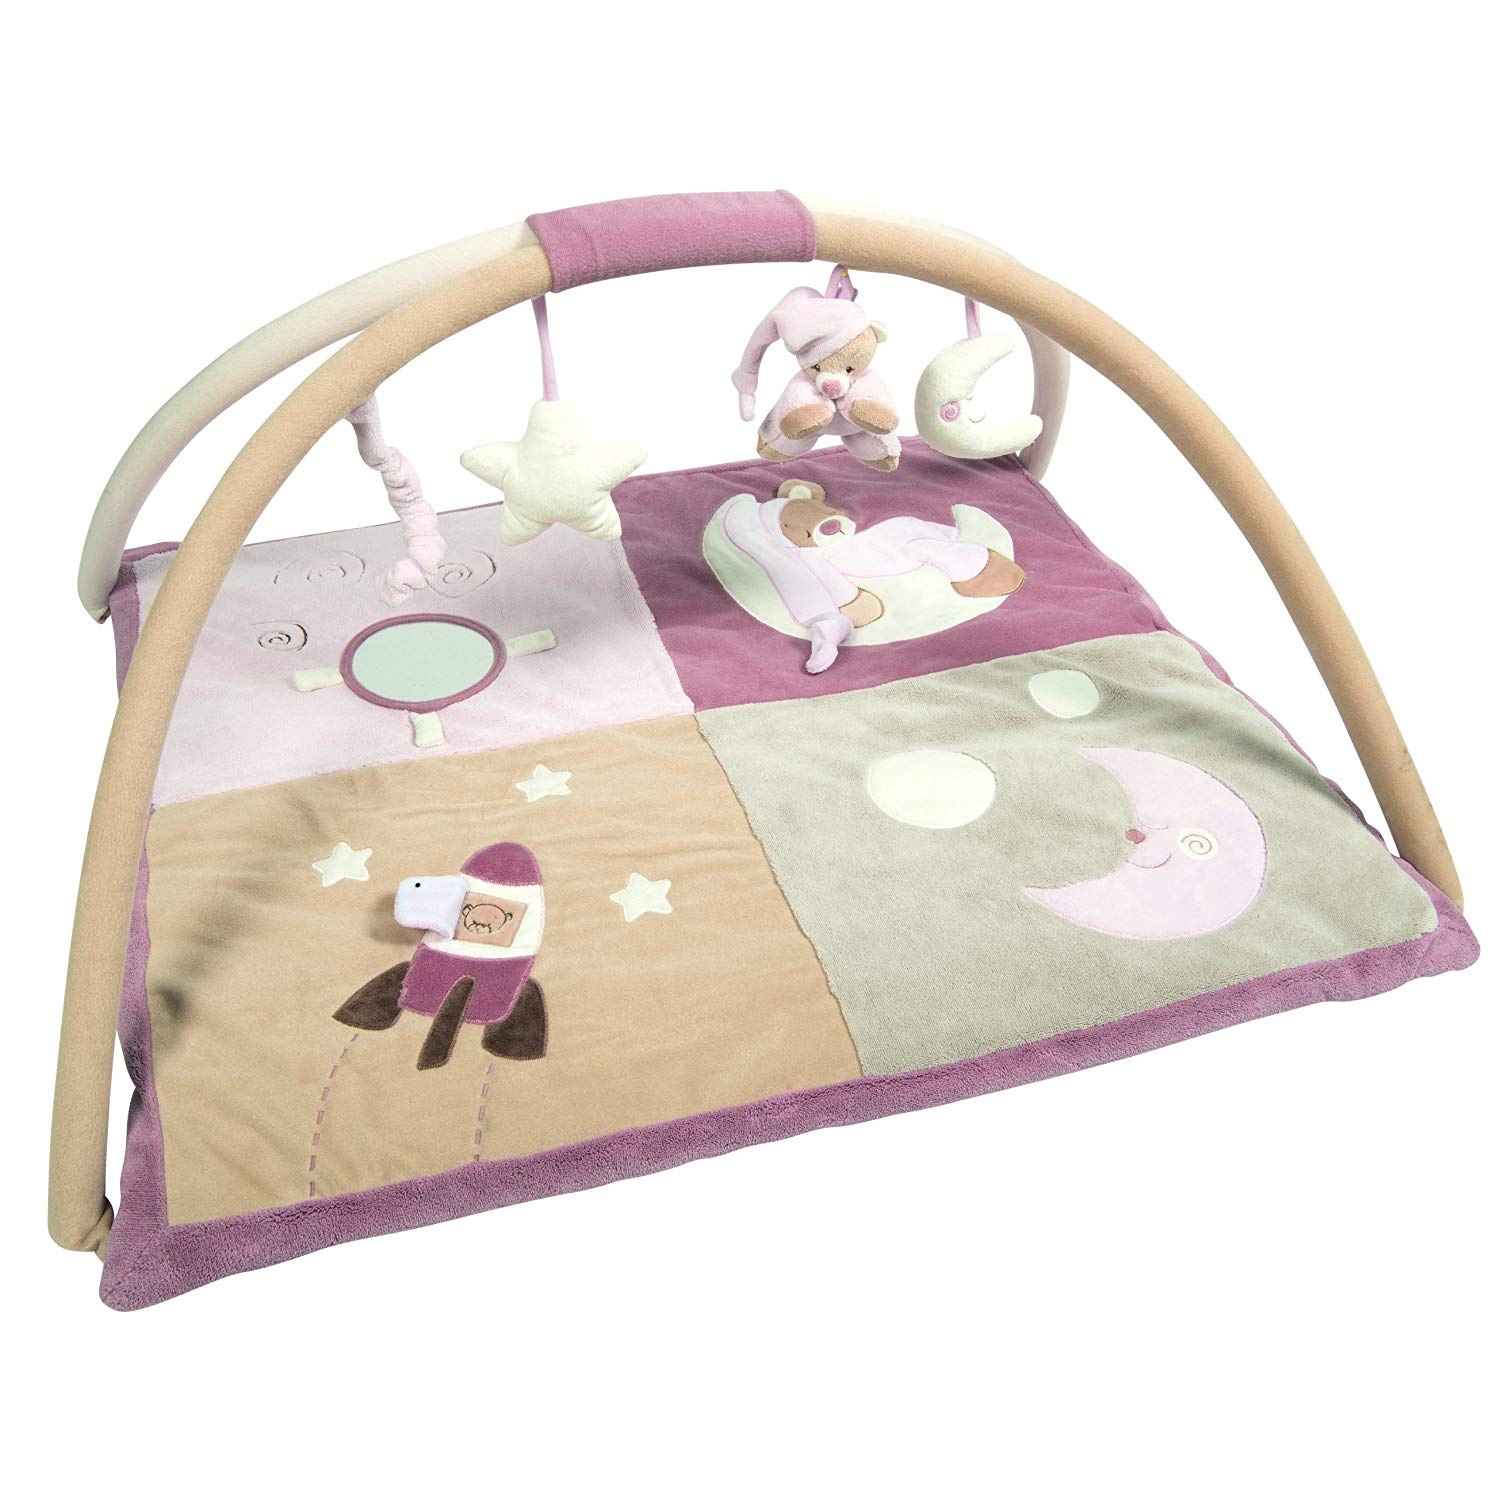 Nattou Milo and Lena 860222 Play Mat with Arched Bar Pink